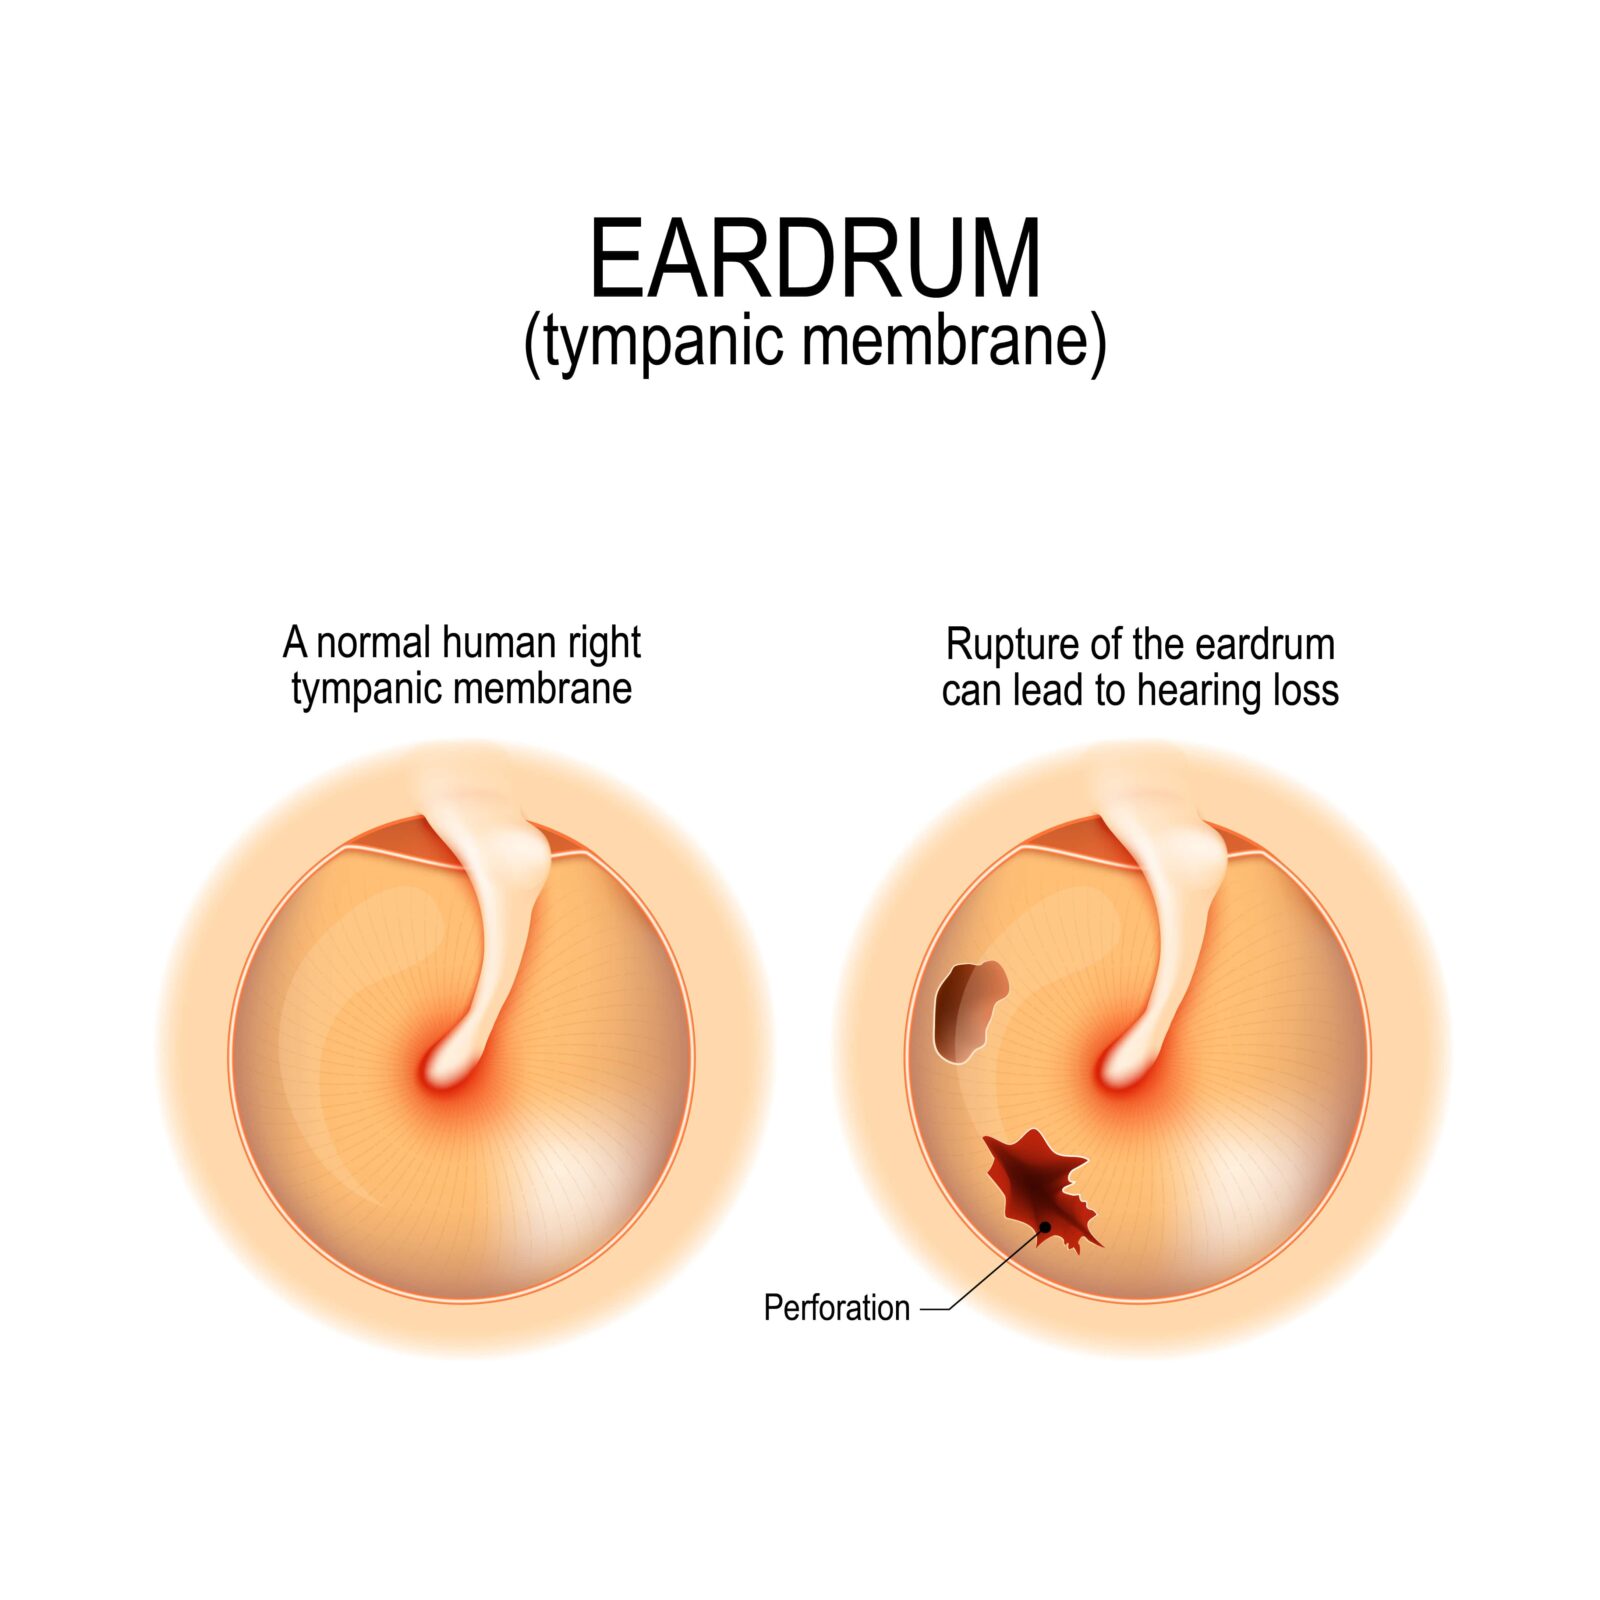 Ruptured eardrum. Anatomy of the humans eardrum. Healthy and perforated tympanic membrane. illustration for medical, science, and educational use